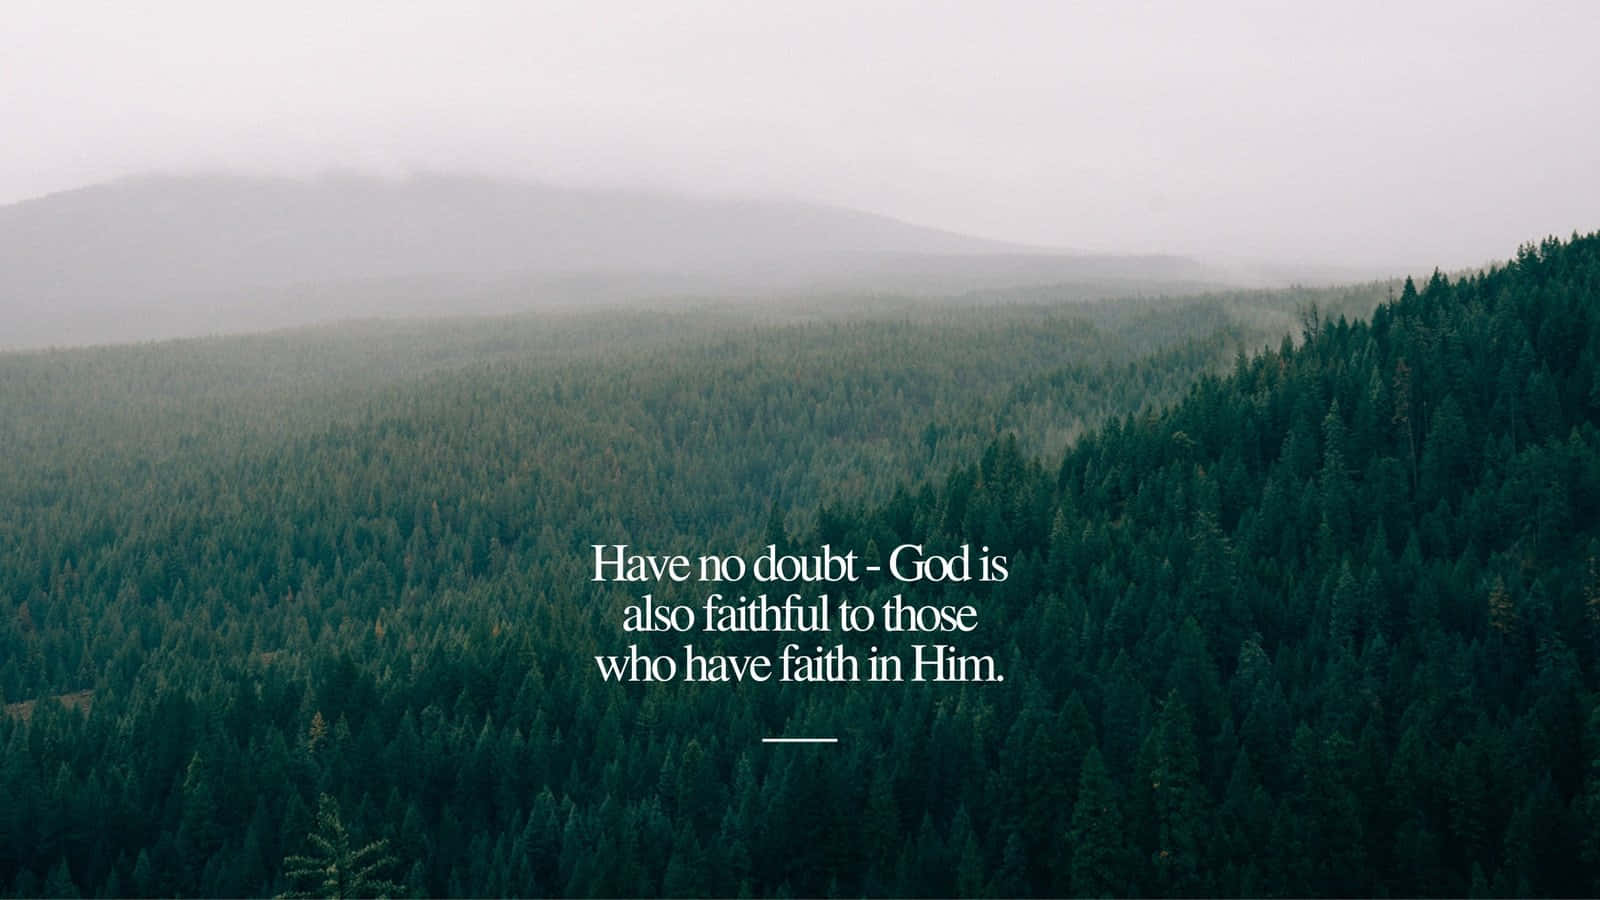 75 Free Christian Wallpapers for your Phone